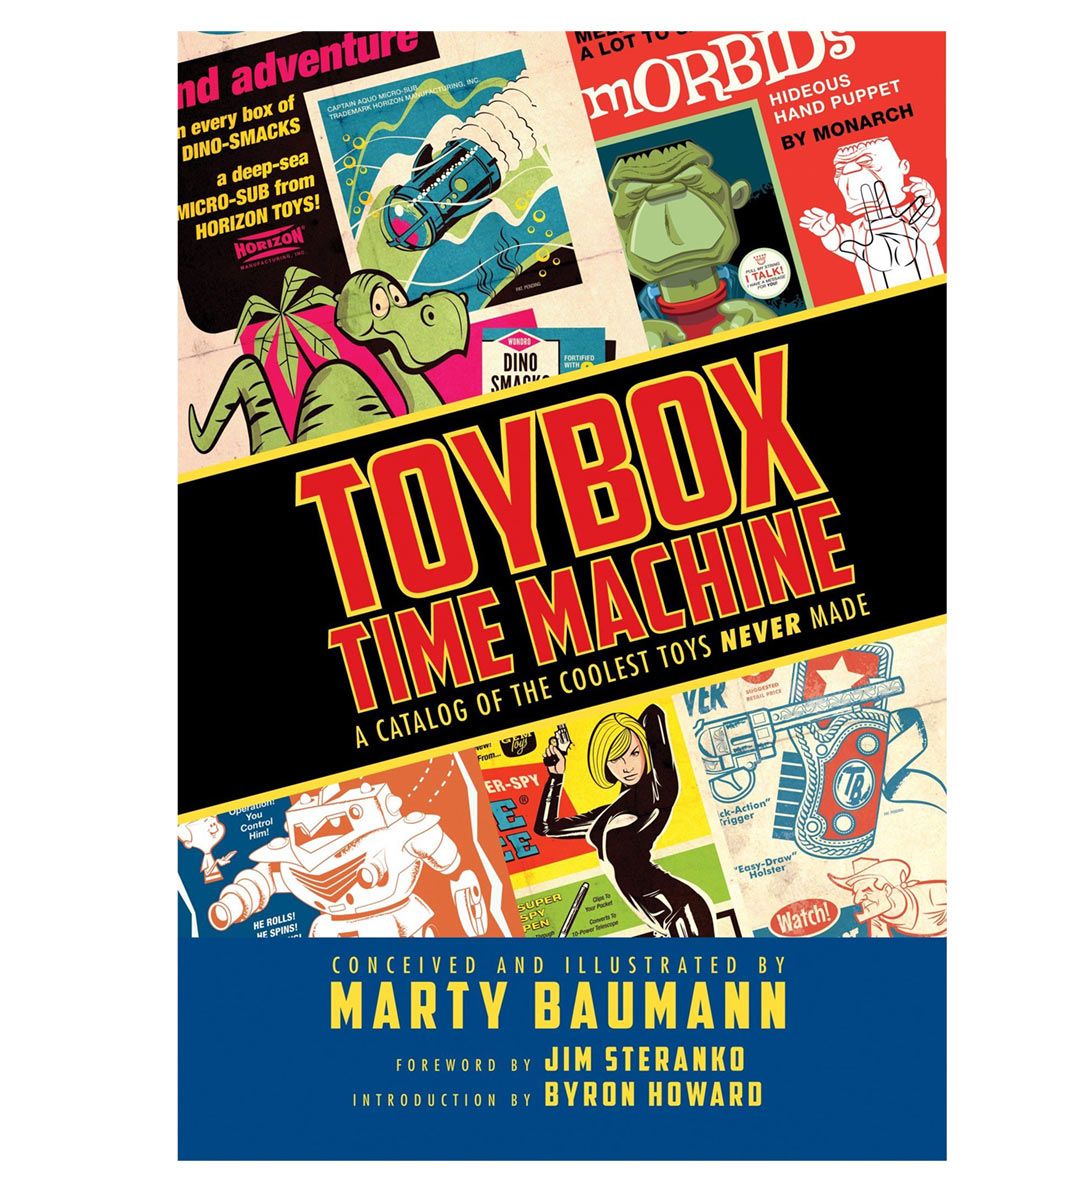 Toybox Time Machine, a catalog of the Coolest Toys Never Made